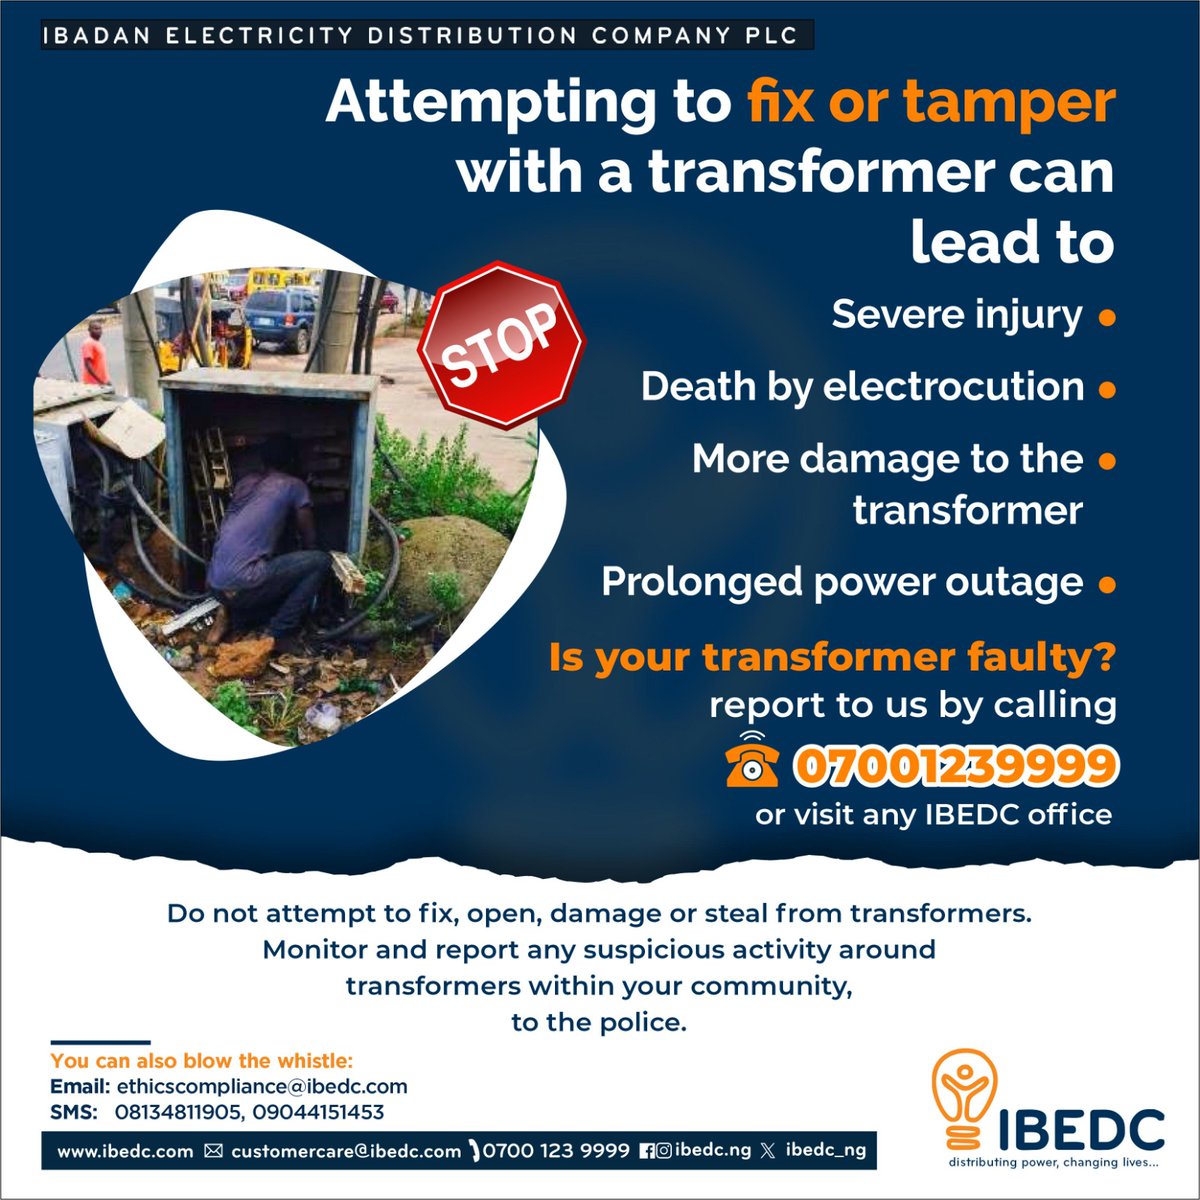 Stay safe! Report all faulty electrical installations to us, call 07001239999. #ibedc #staysafe #safetyfirst #safetyalways #distributingpower #changinglives